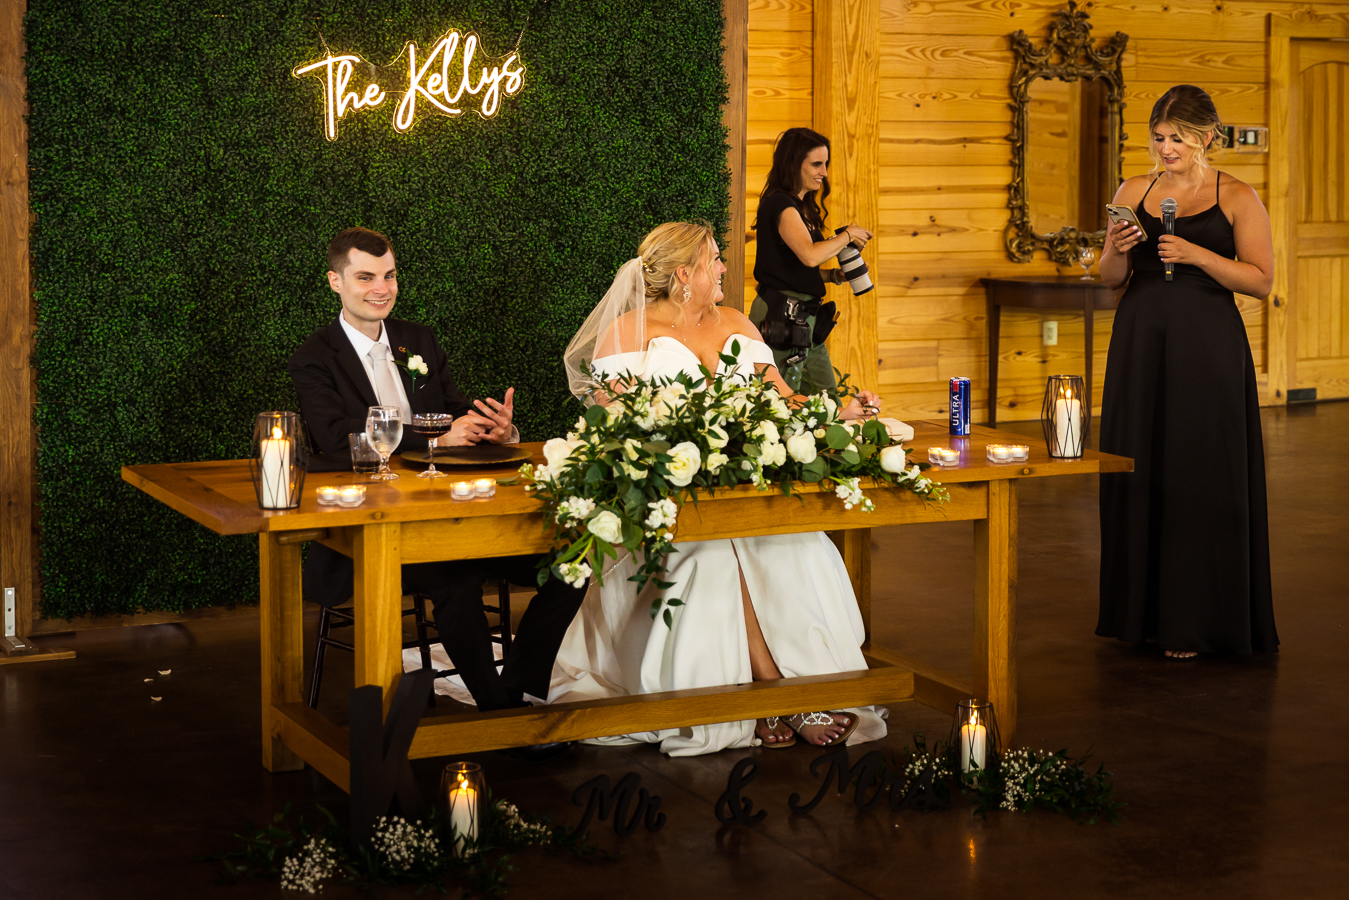 image of the bride and groom sitting at their table while one of the bridesmaids gives a speech during their wedding reception